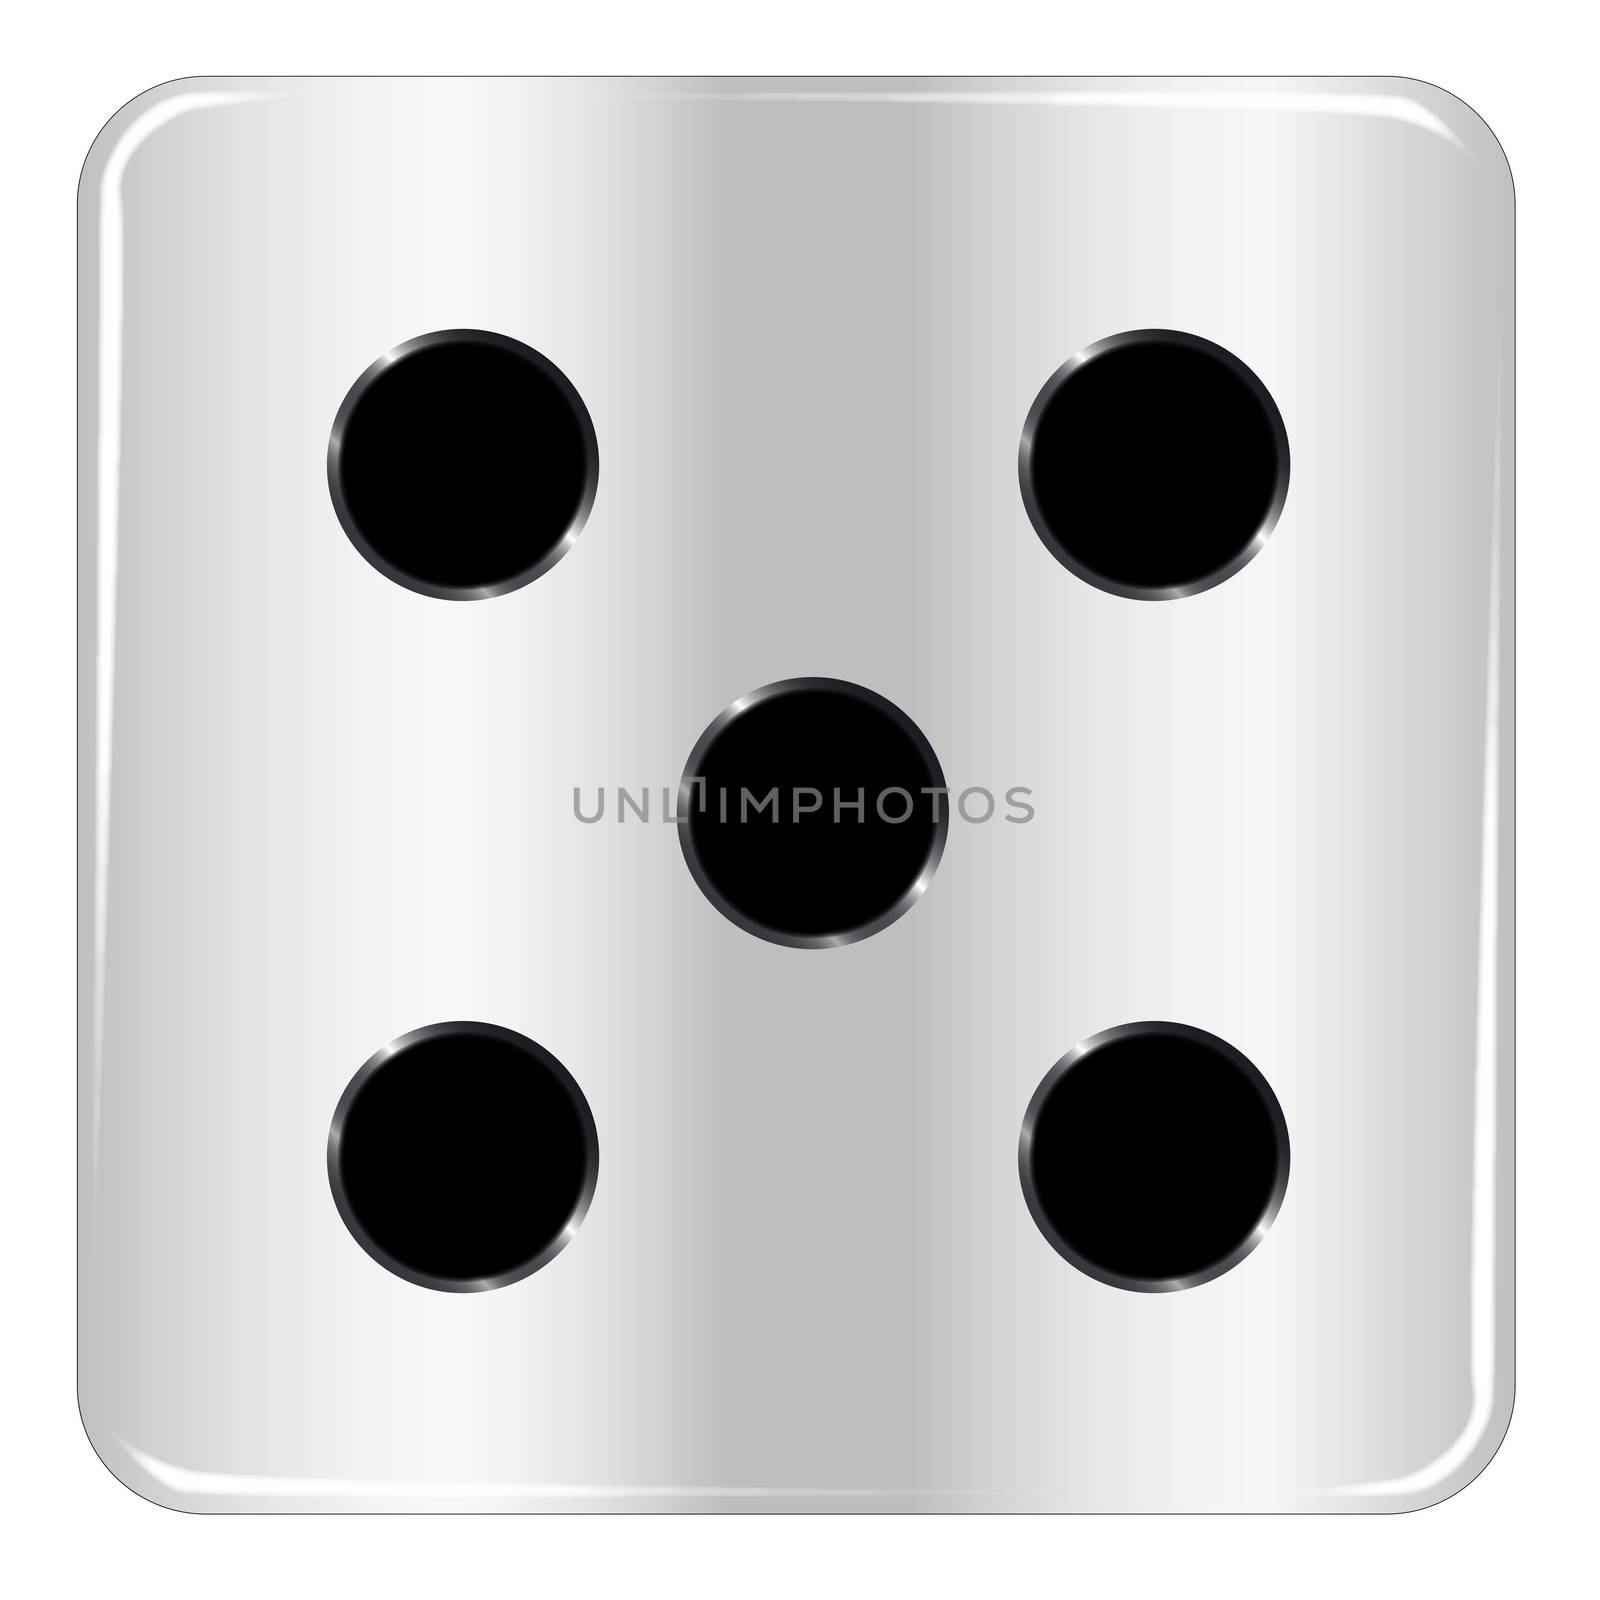 The face of a dice with five black spots over a white background